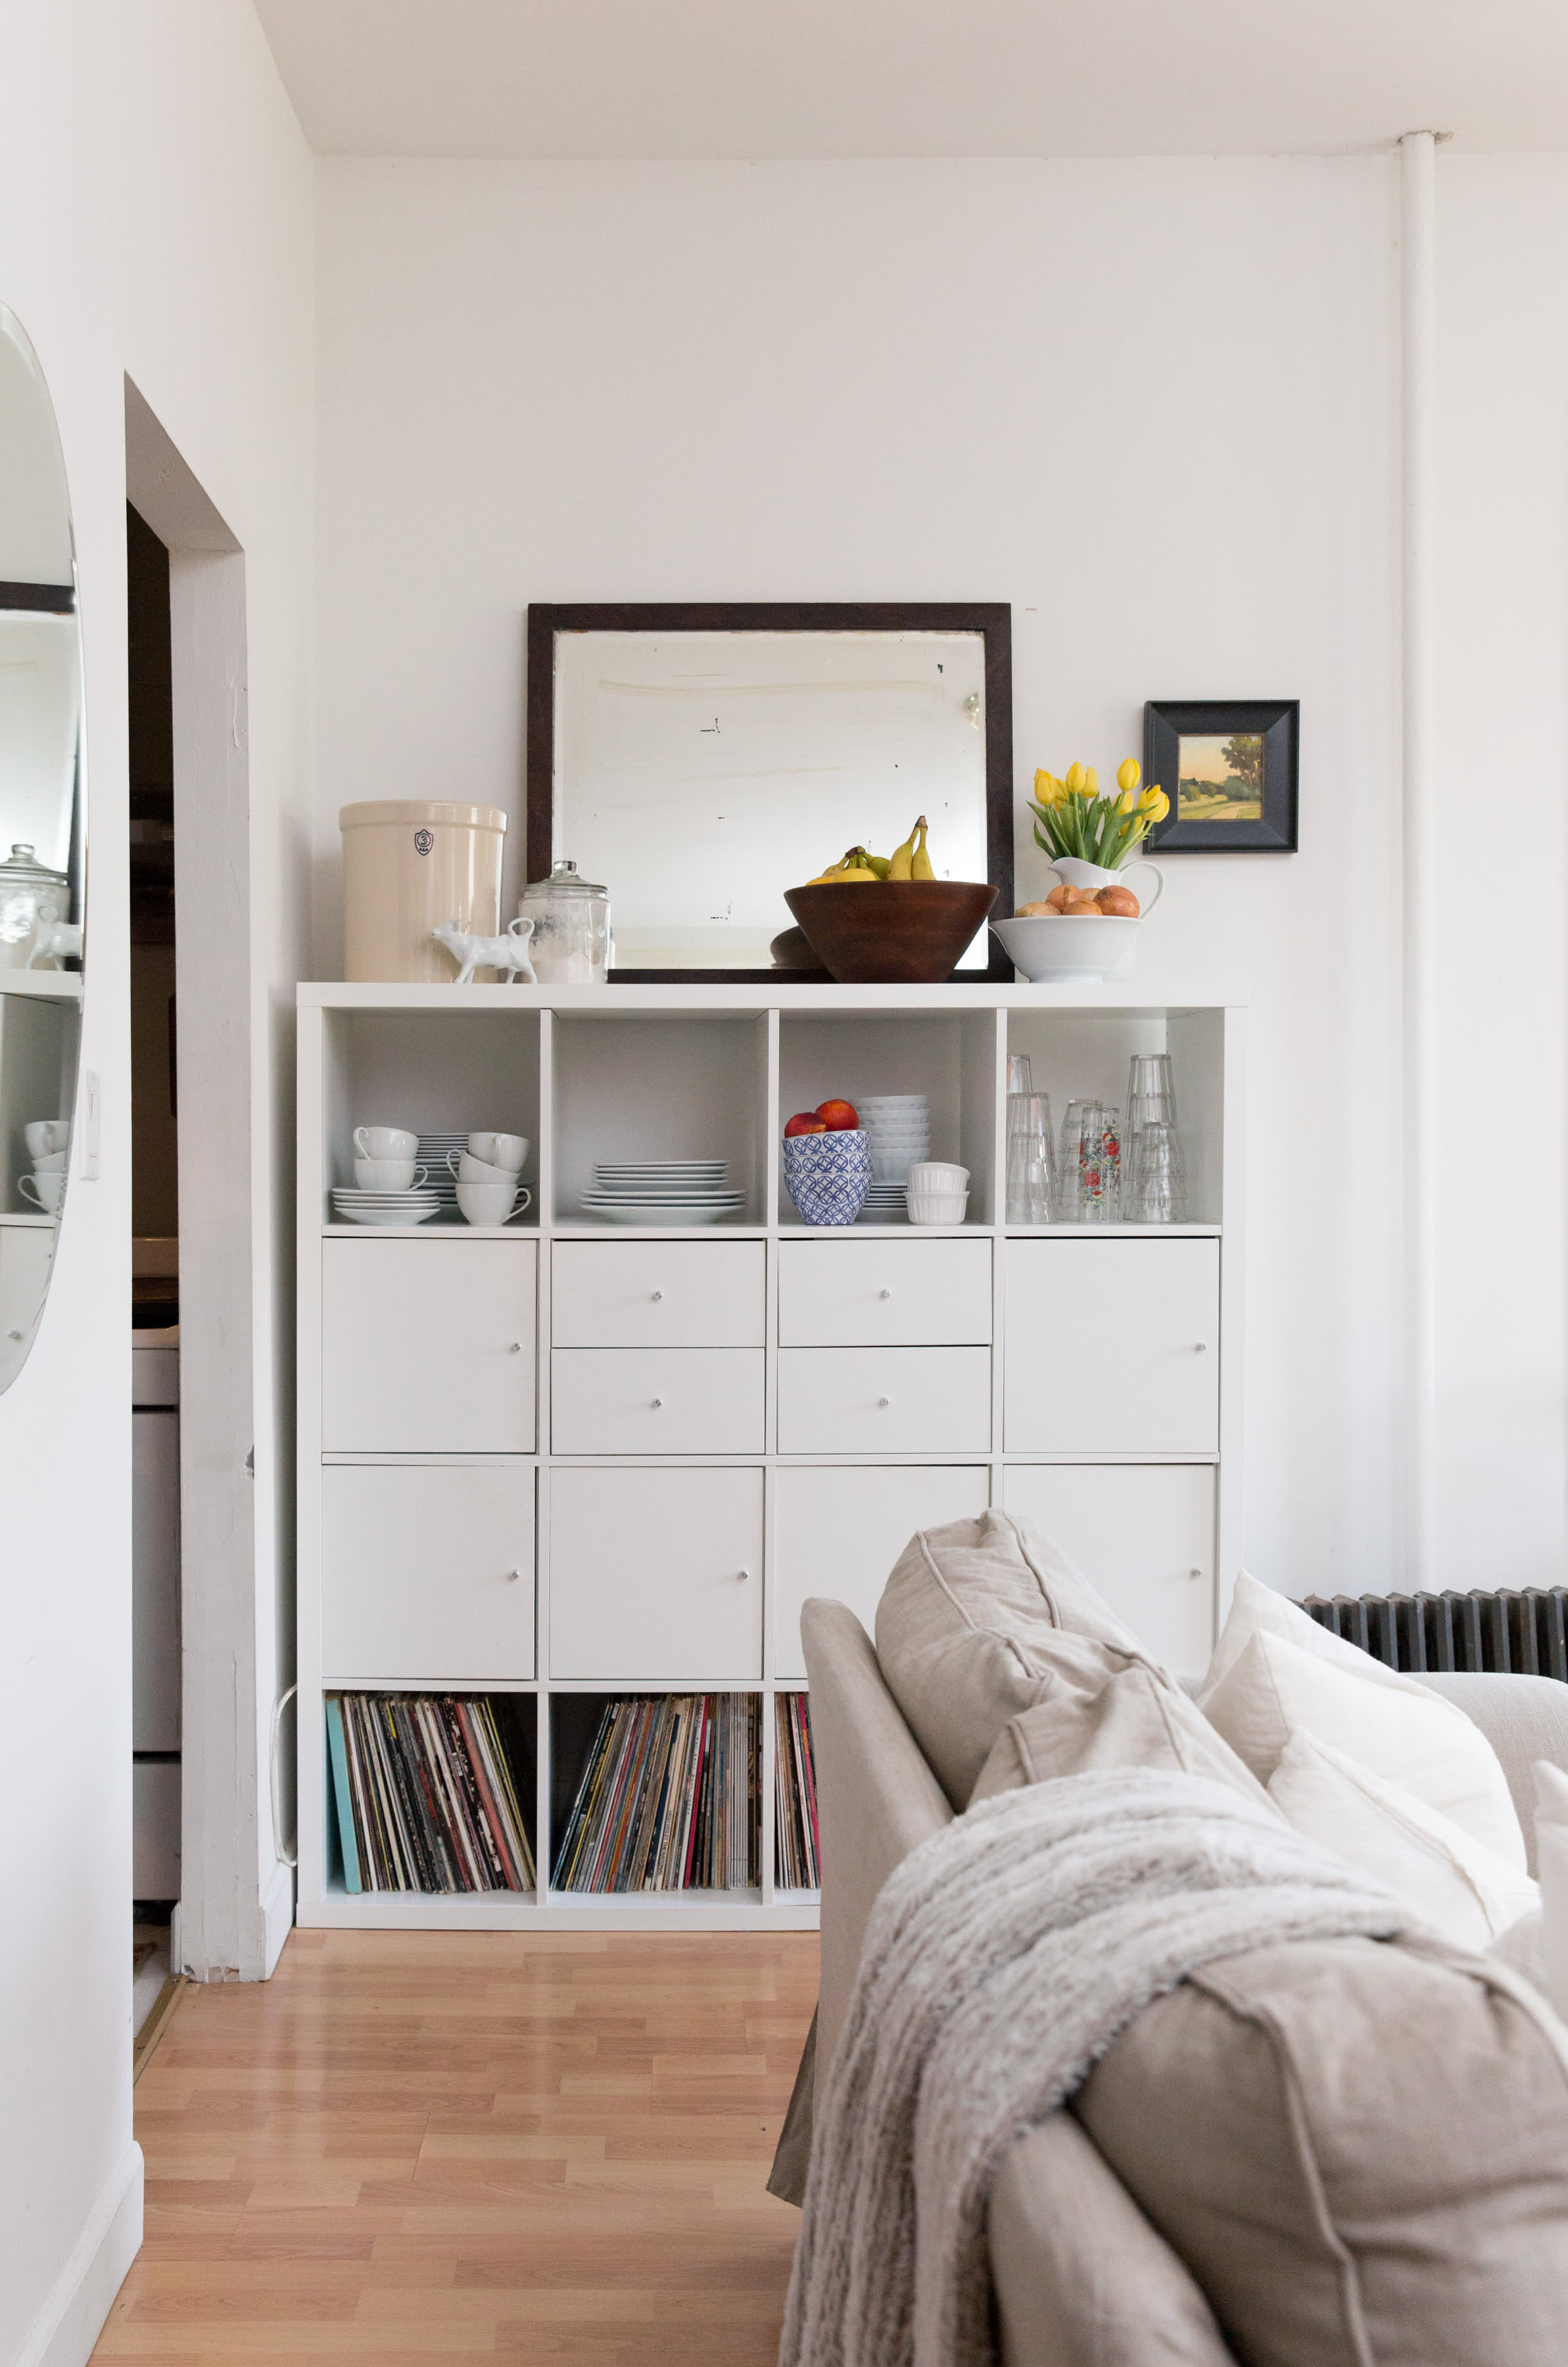 7 storage ideas for small spaces to help stay organized - Your DIY